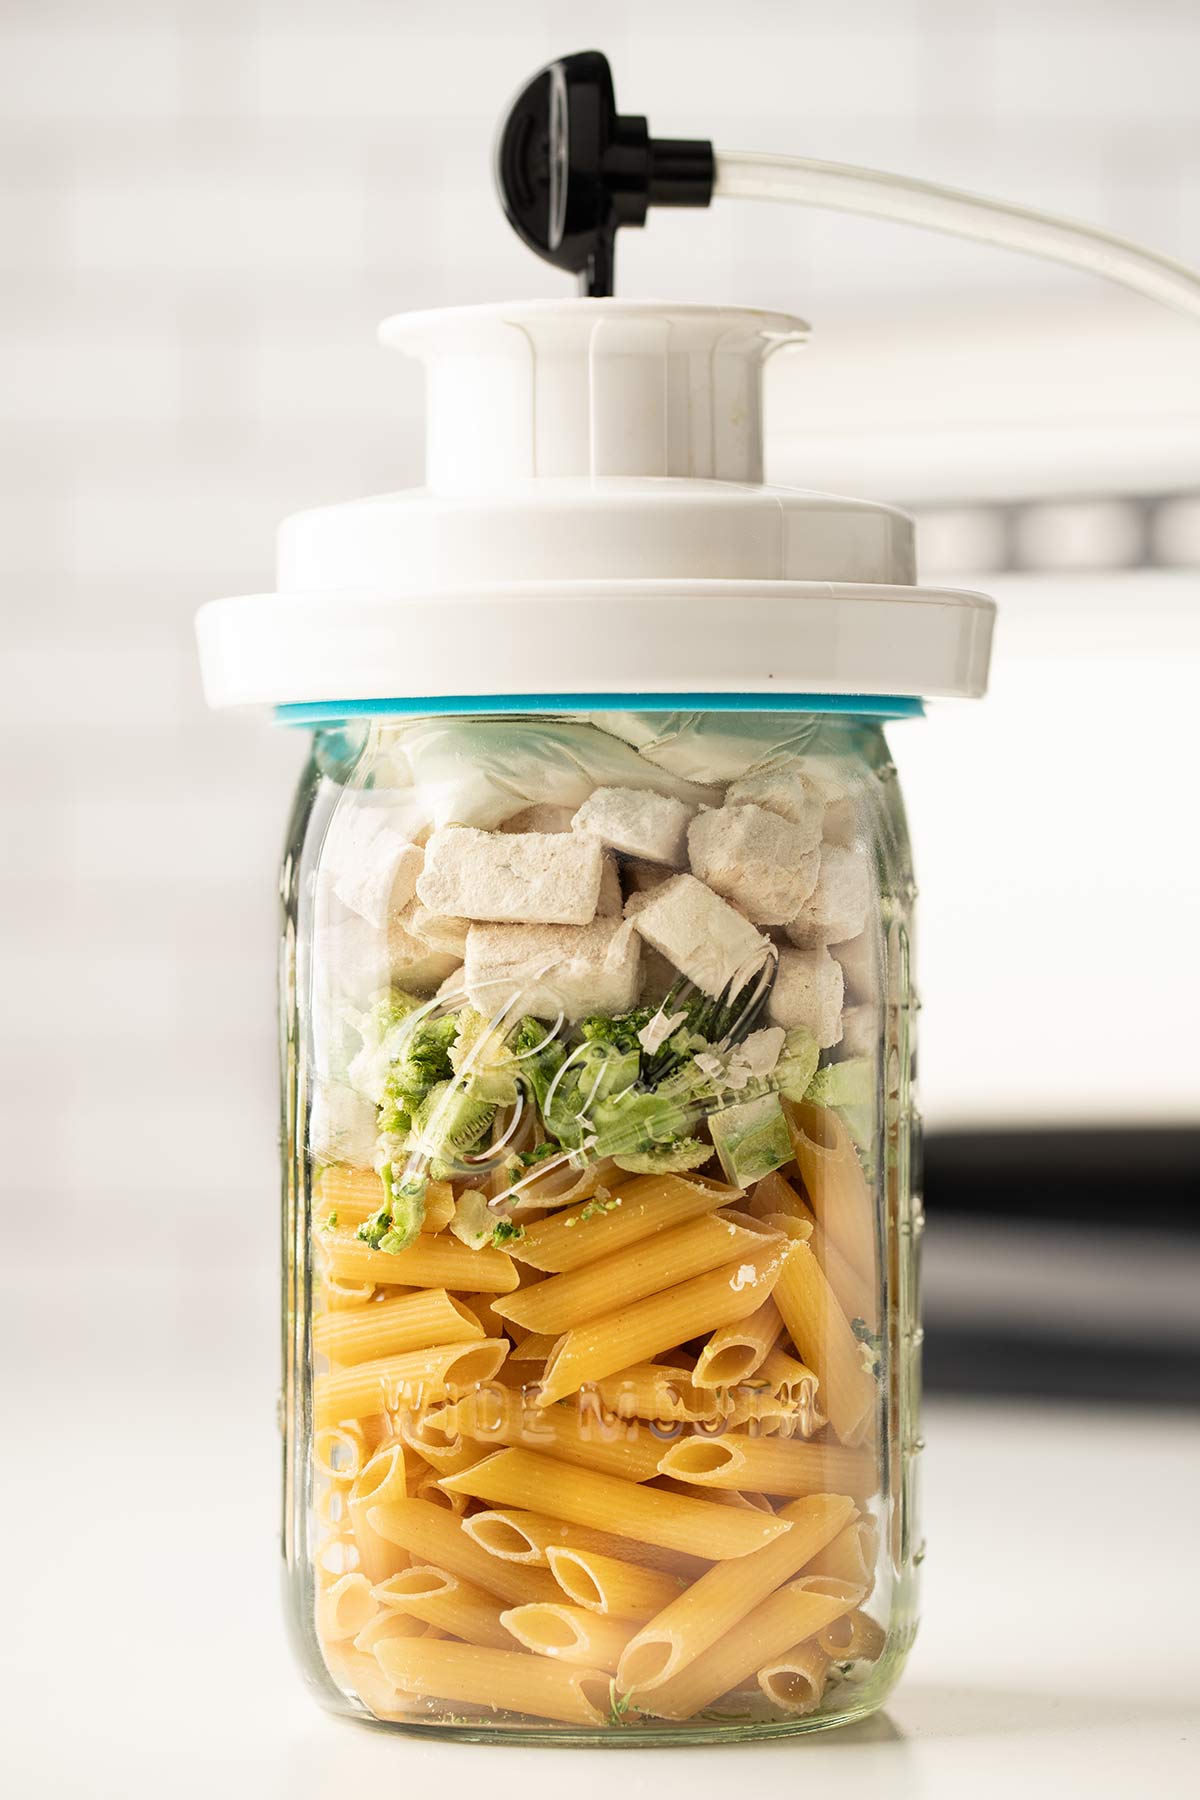 Jar sealer attachment being used to vacuum seal the Chicken Broccoli Alfredo meal in a jar.